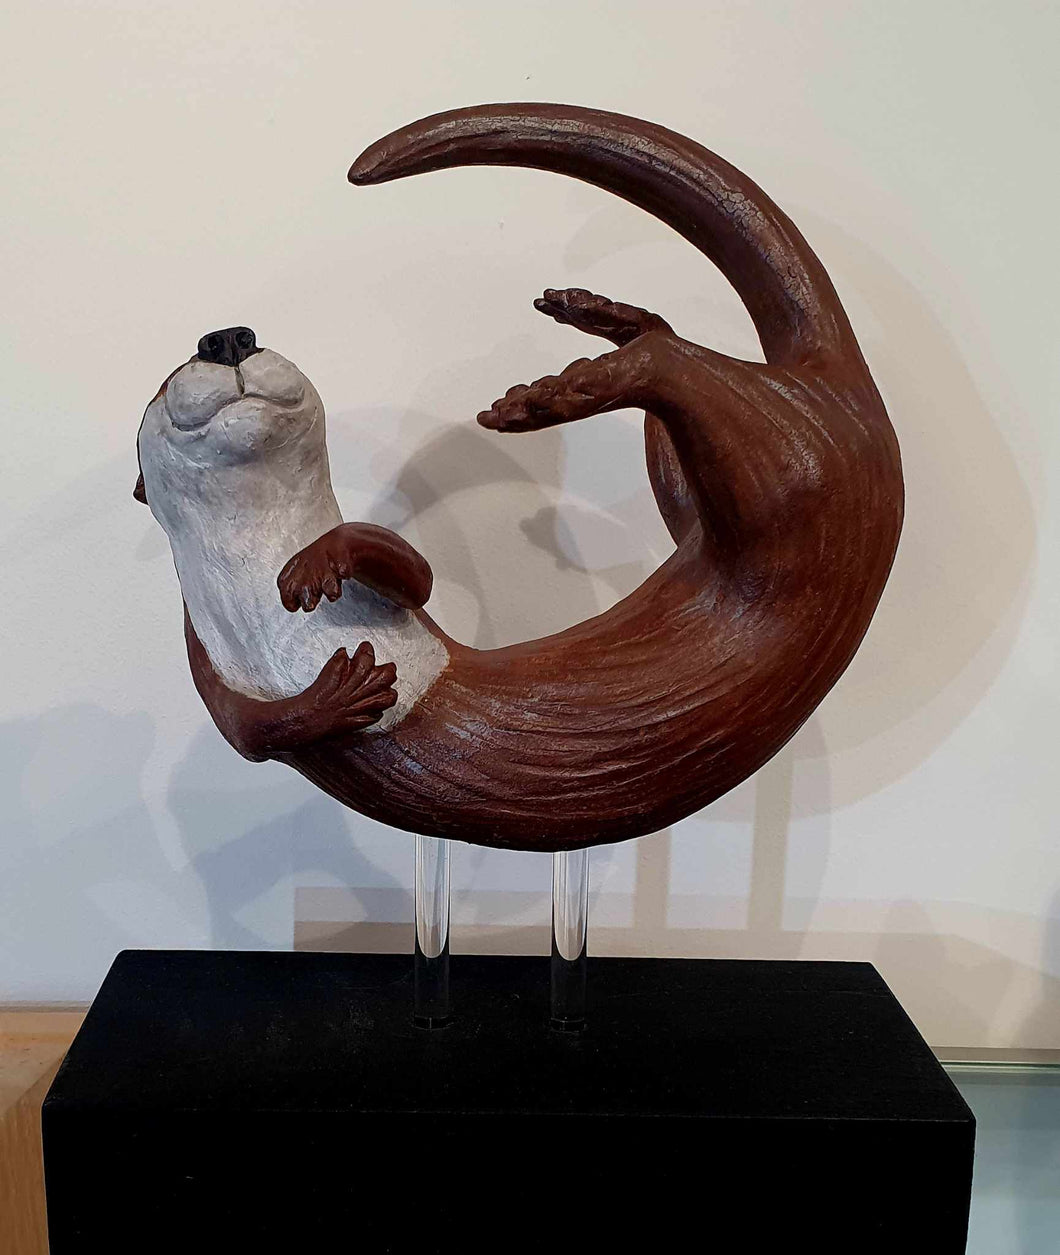 Tumbling otter ceramic by Pippa hill